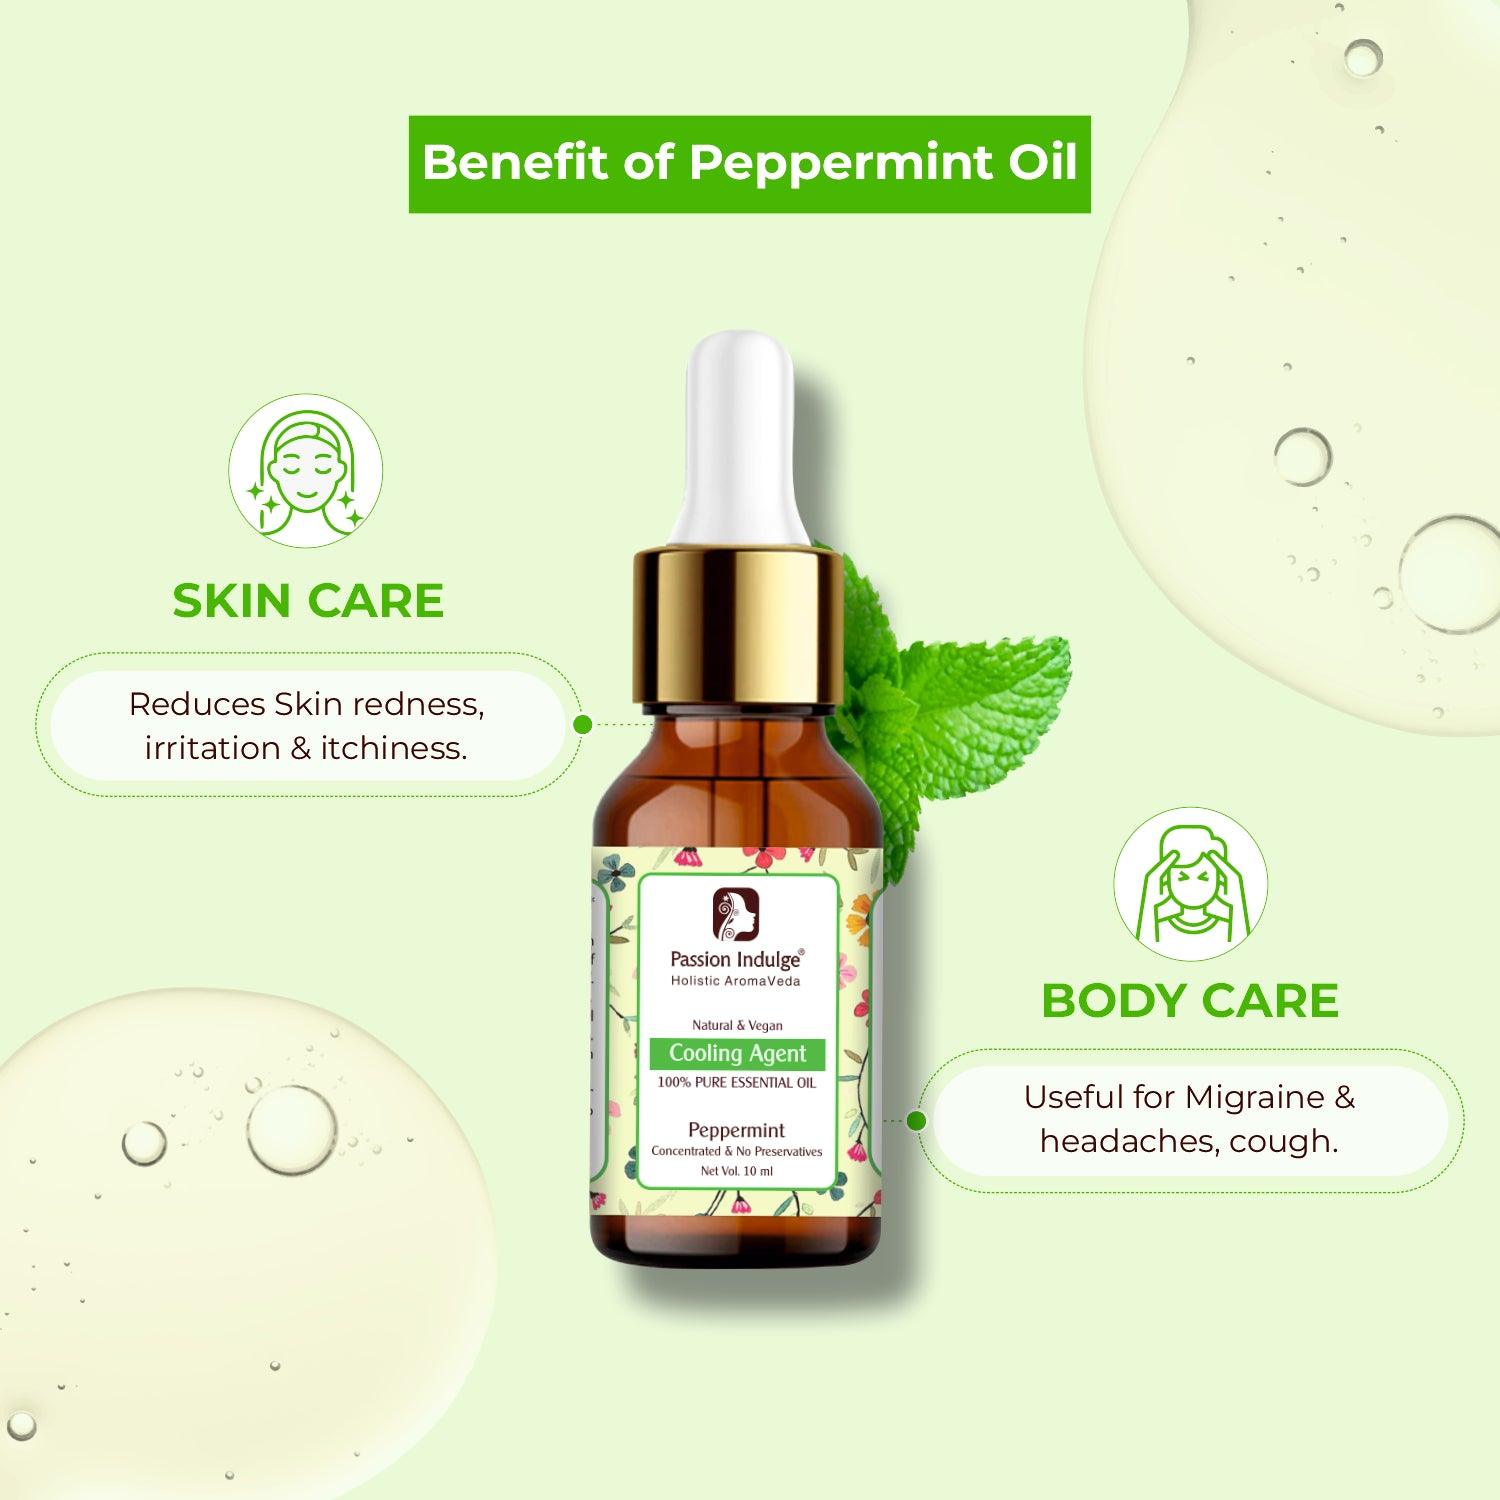 Peppermint Essential Oil 10ml for Reduces Redness, Irritation, Itchiness and Cooling Effect on Skin | Natural & Vegan - passionindulge